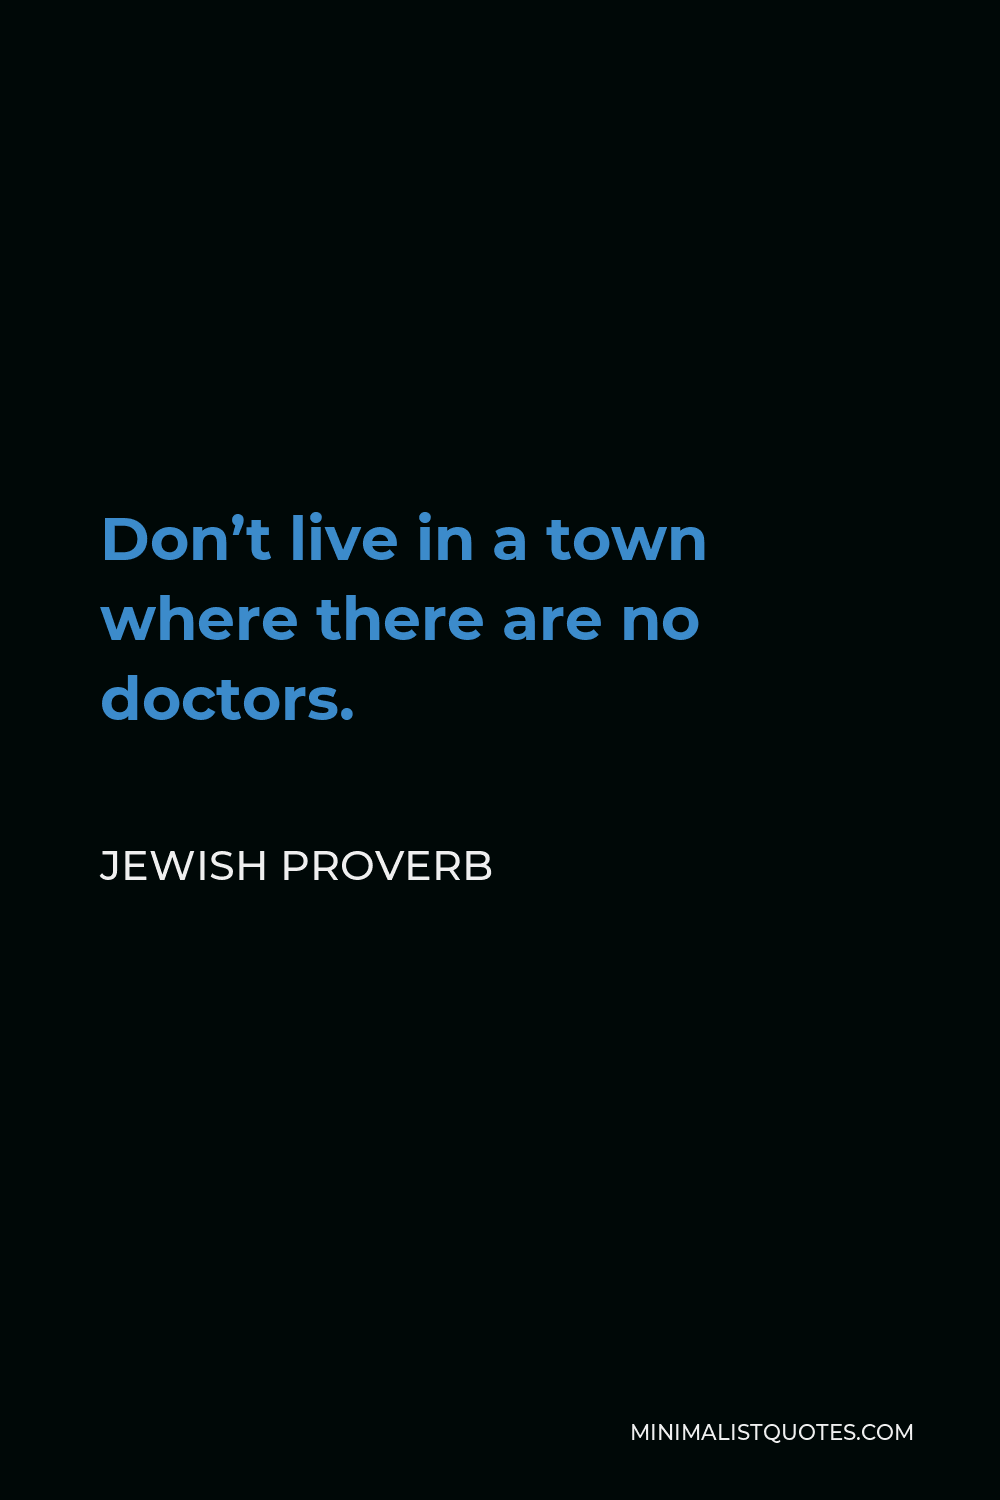 Jewish Proverb Quote - Don’t live in a town where there are no doctors.